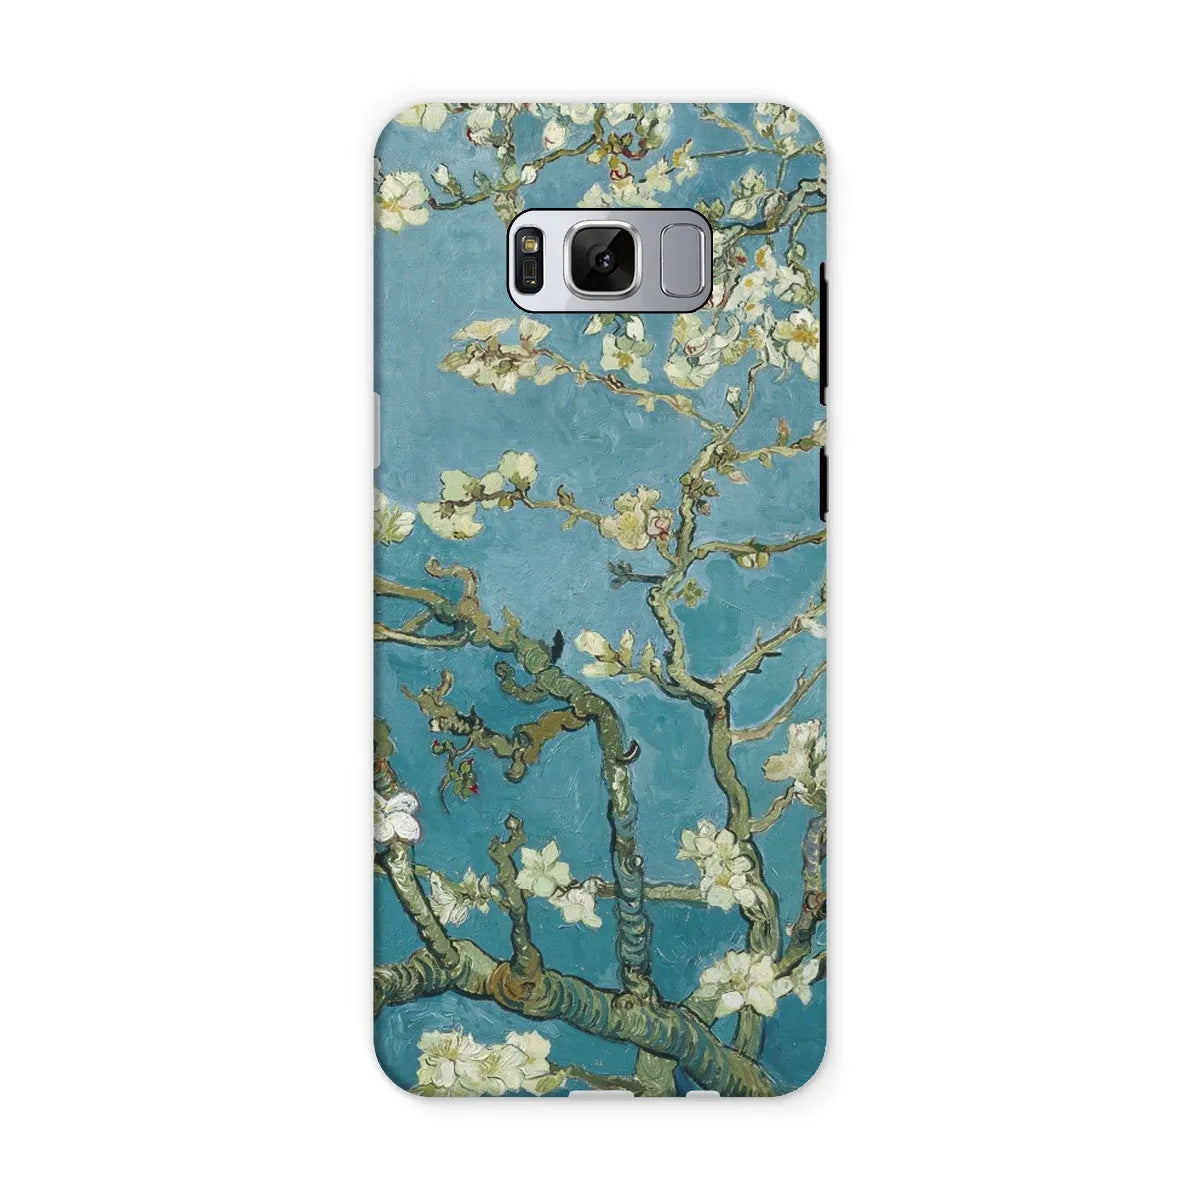 Almond Blossom - Vincent Van Gogh Aesthetic Phone Case - Samsung Galaxy S8 / Matte - Mobile Phone Cases - Aesthetic Art